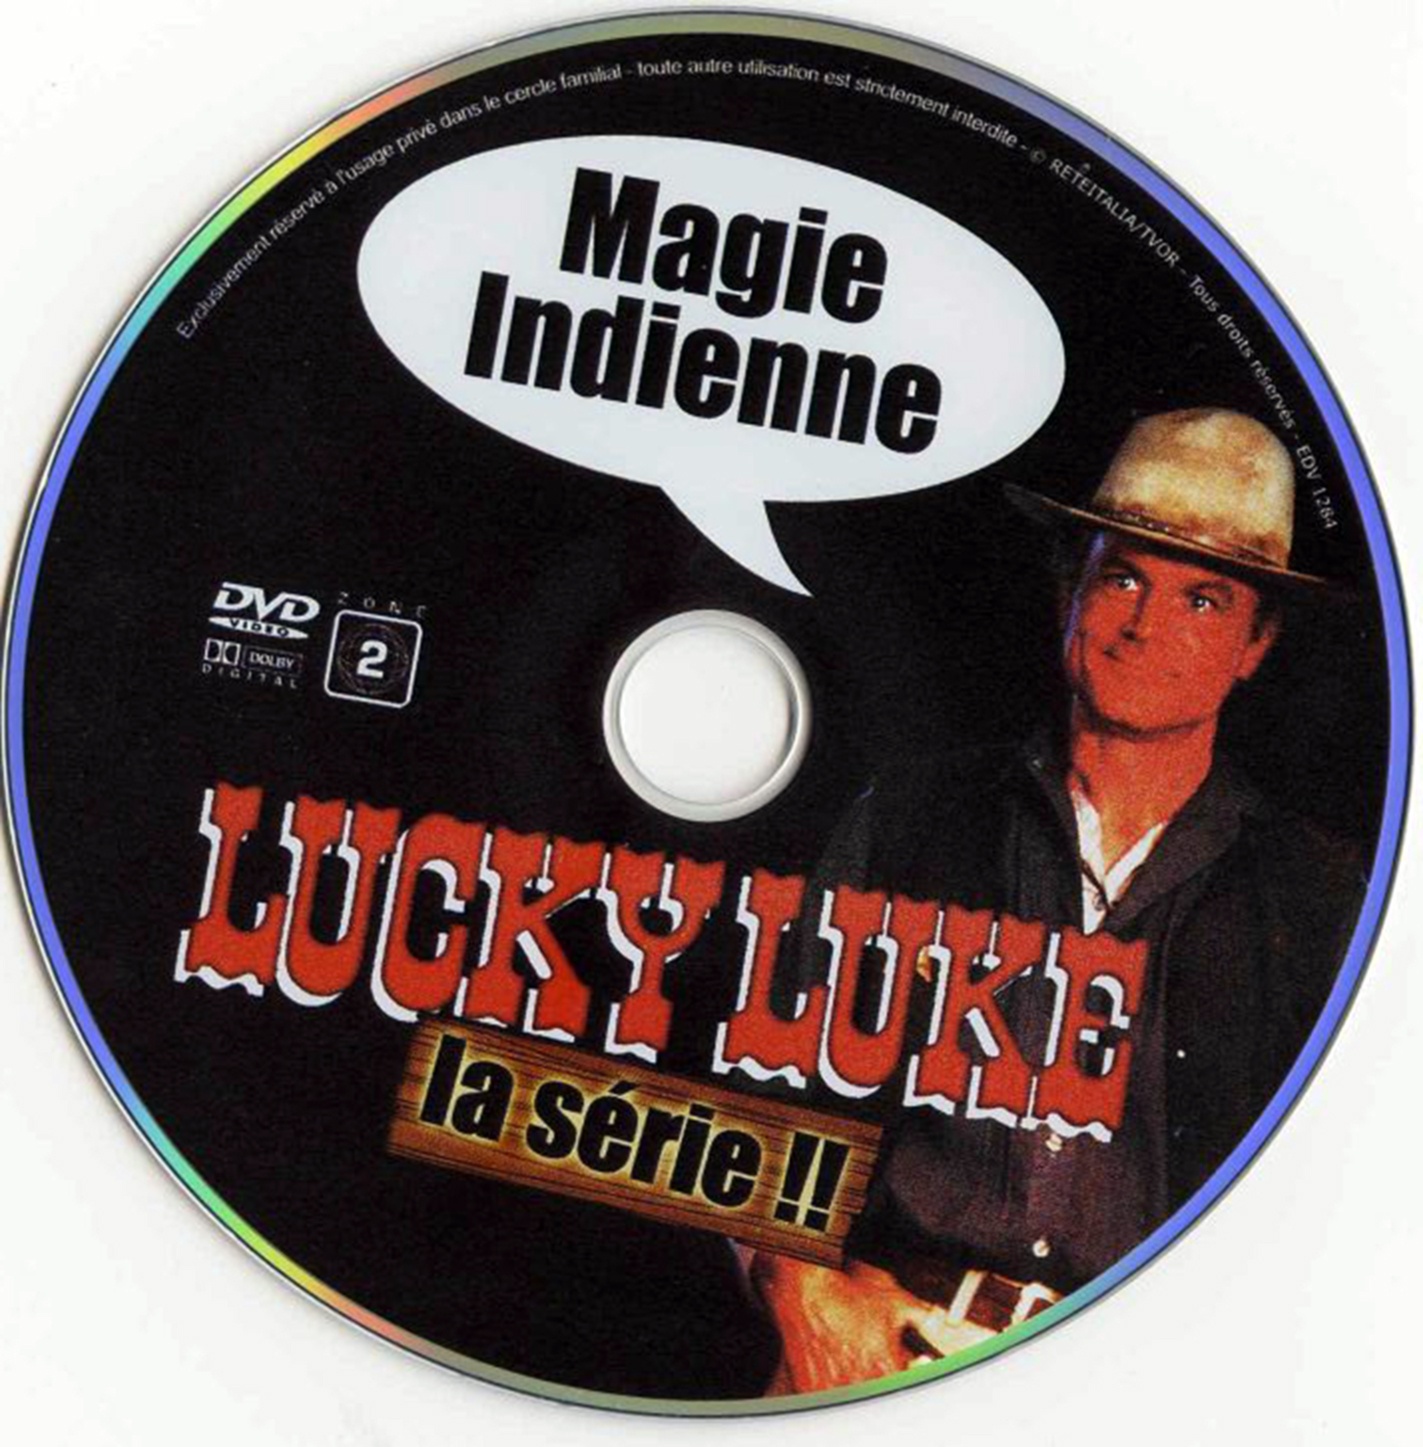 Lucky Luke (Terence Hill) - Magie indienne